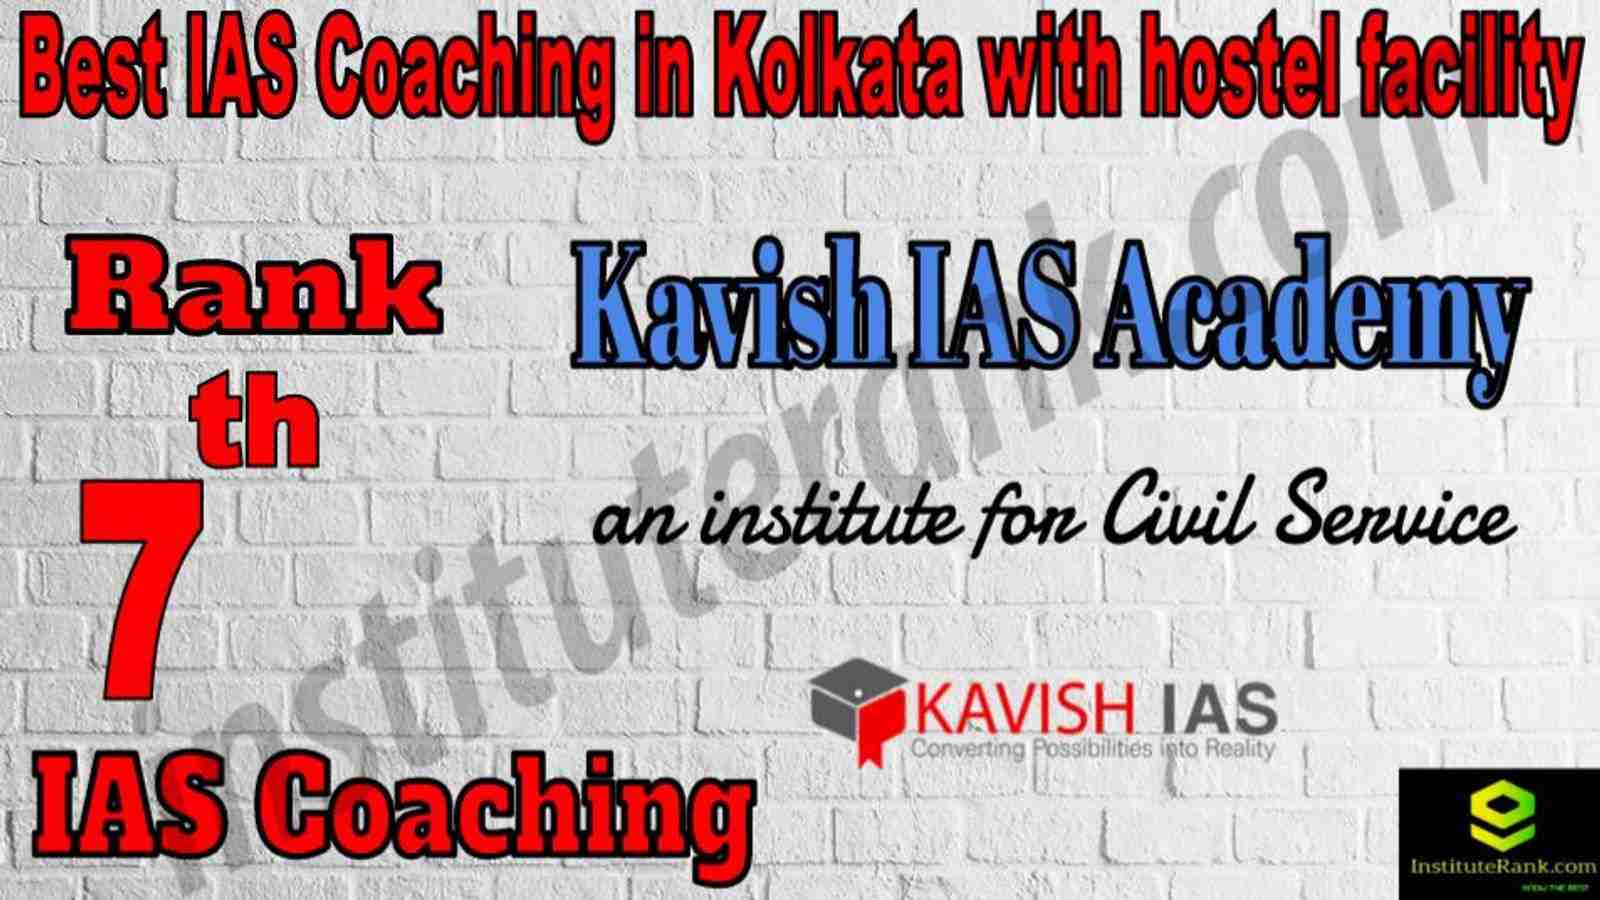 7th Best IAS Coaching in Kolkata with hostel facility